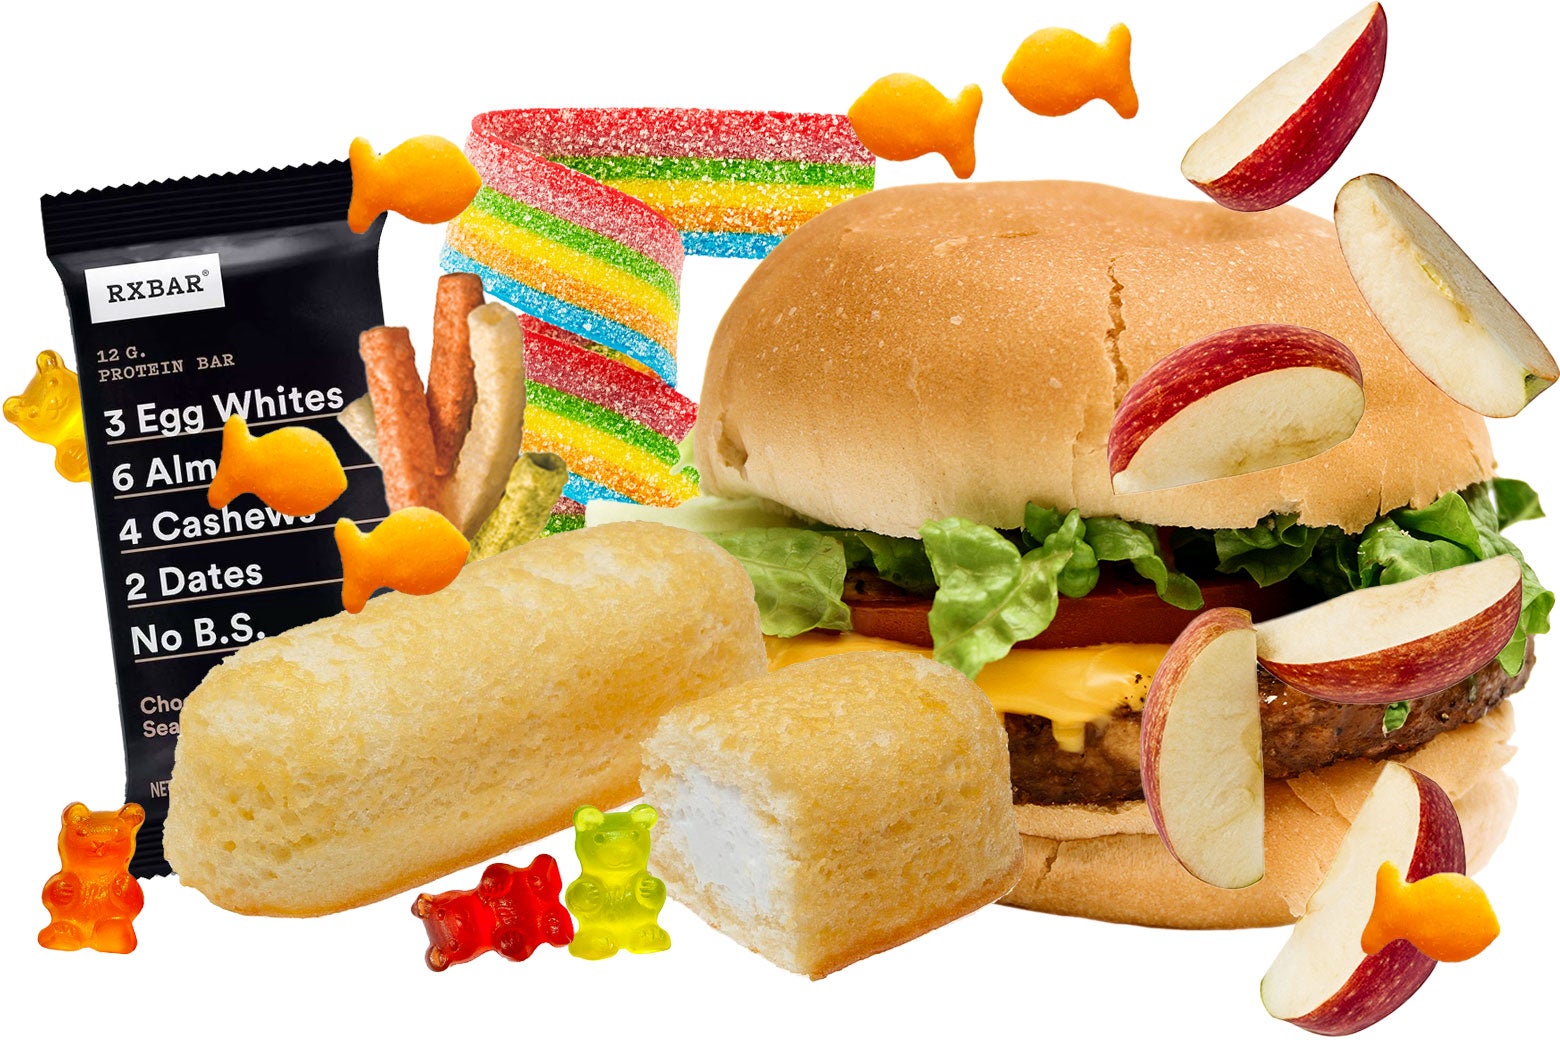 So, Do We Really Need to Freak Out About Ultraprocessed Foods?